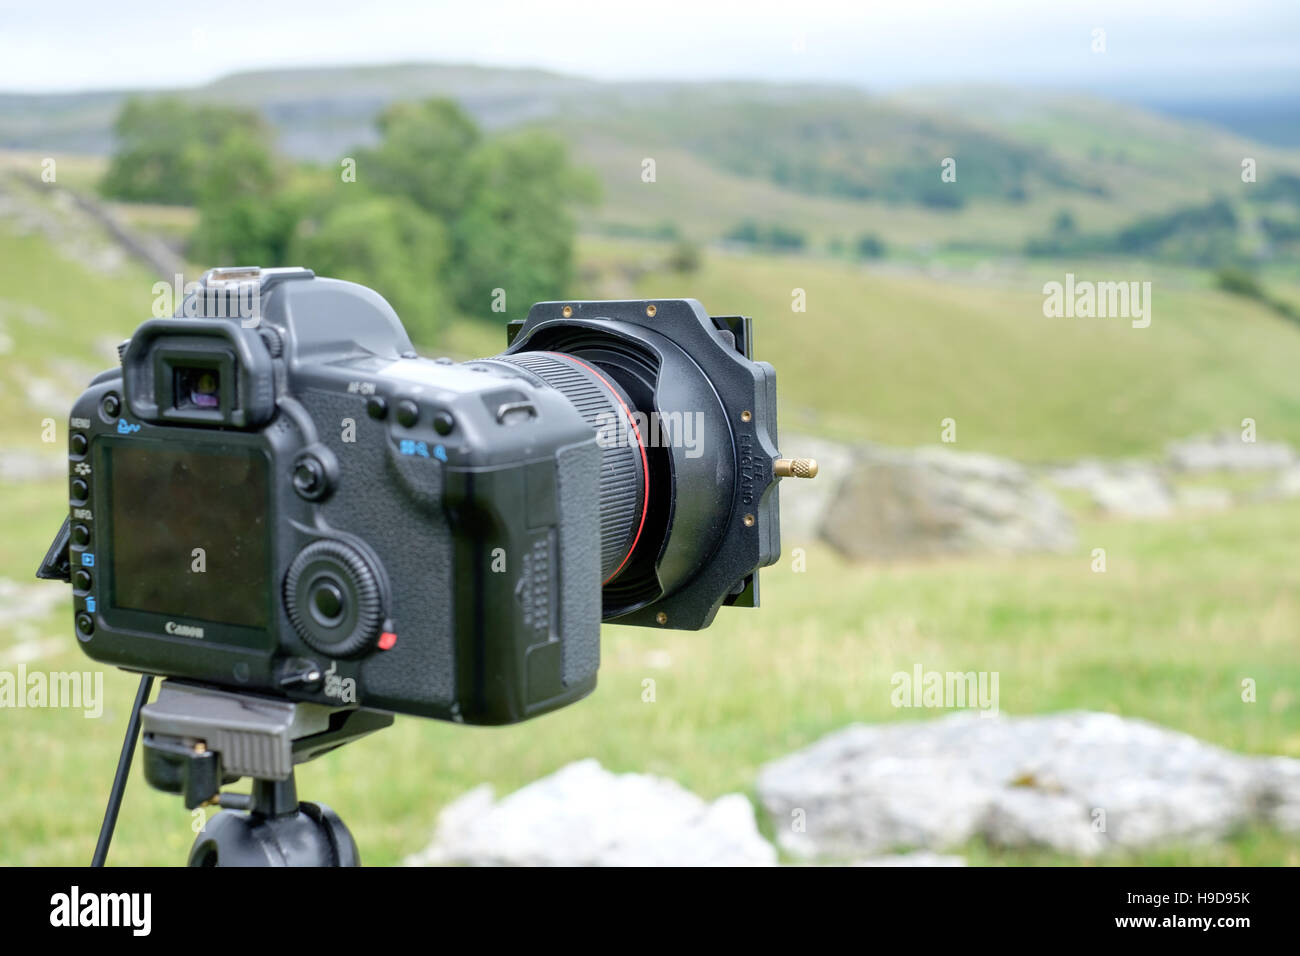 DSLR Camera with filter on tripod taking a landscape image Stock Photo